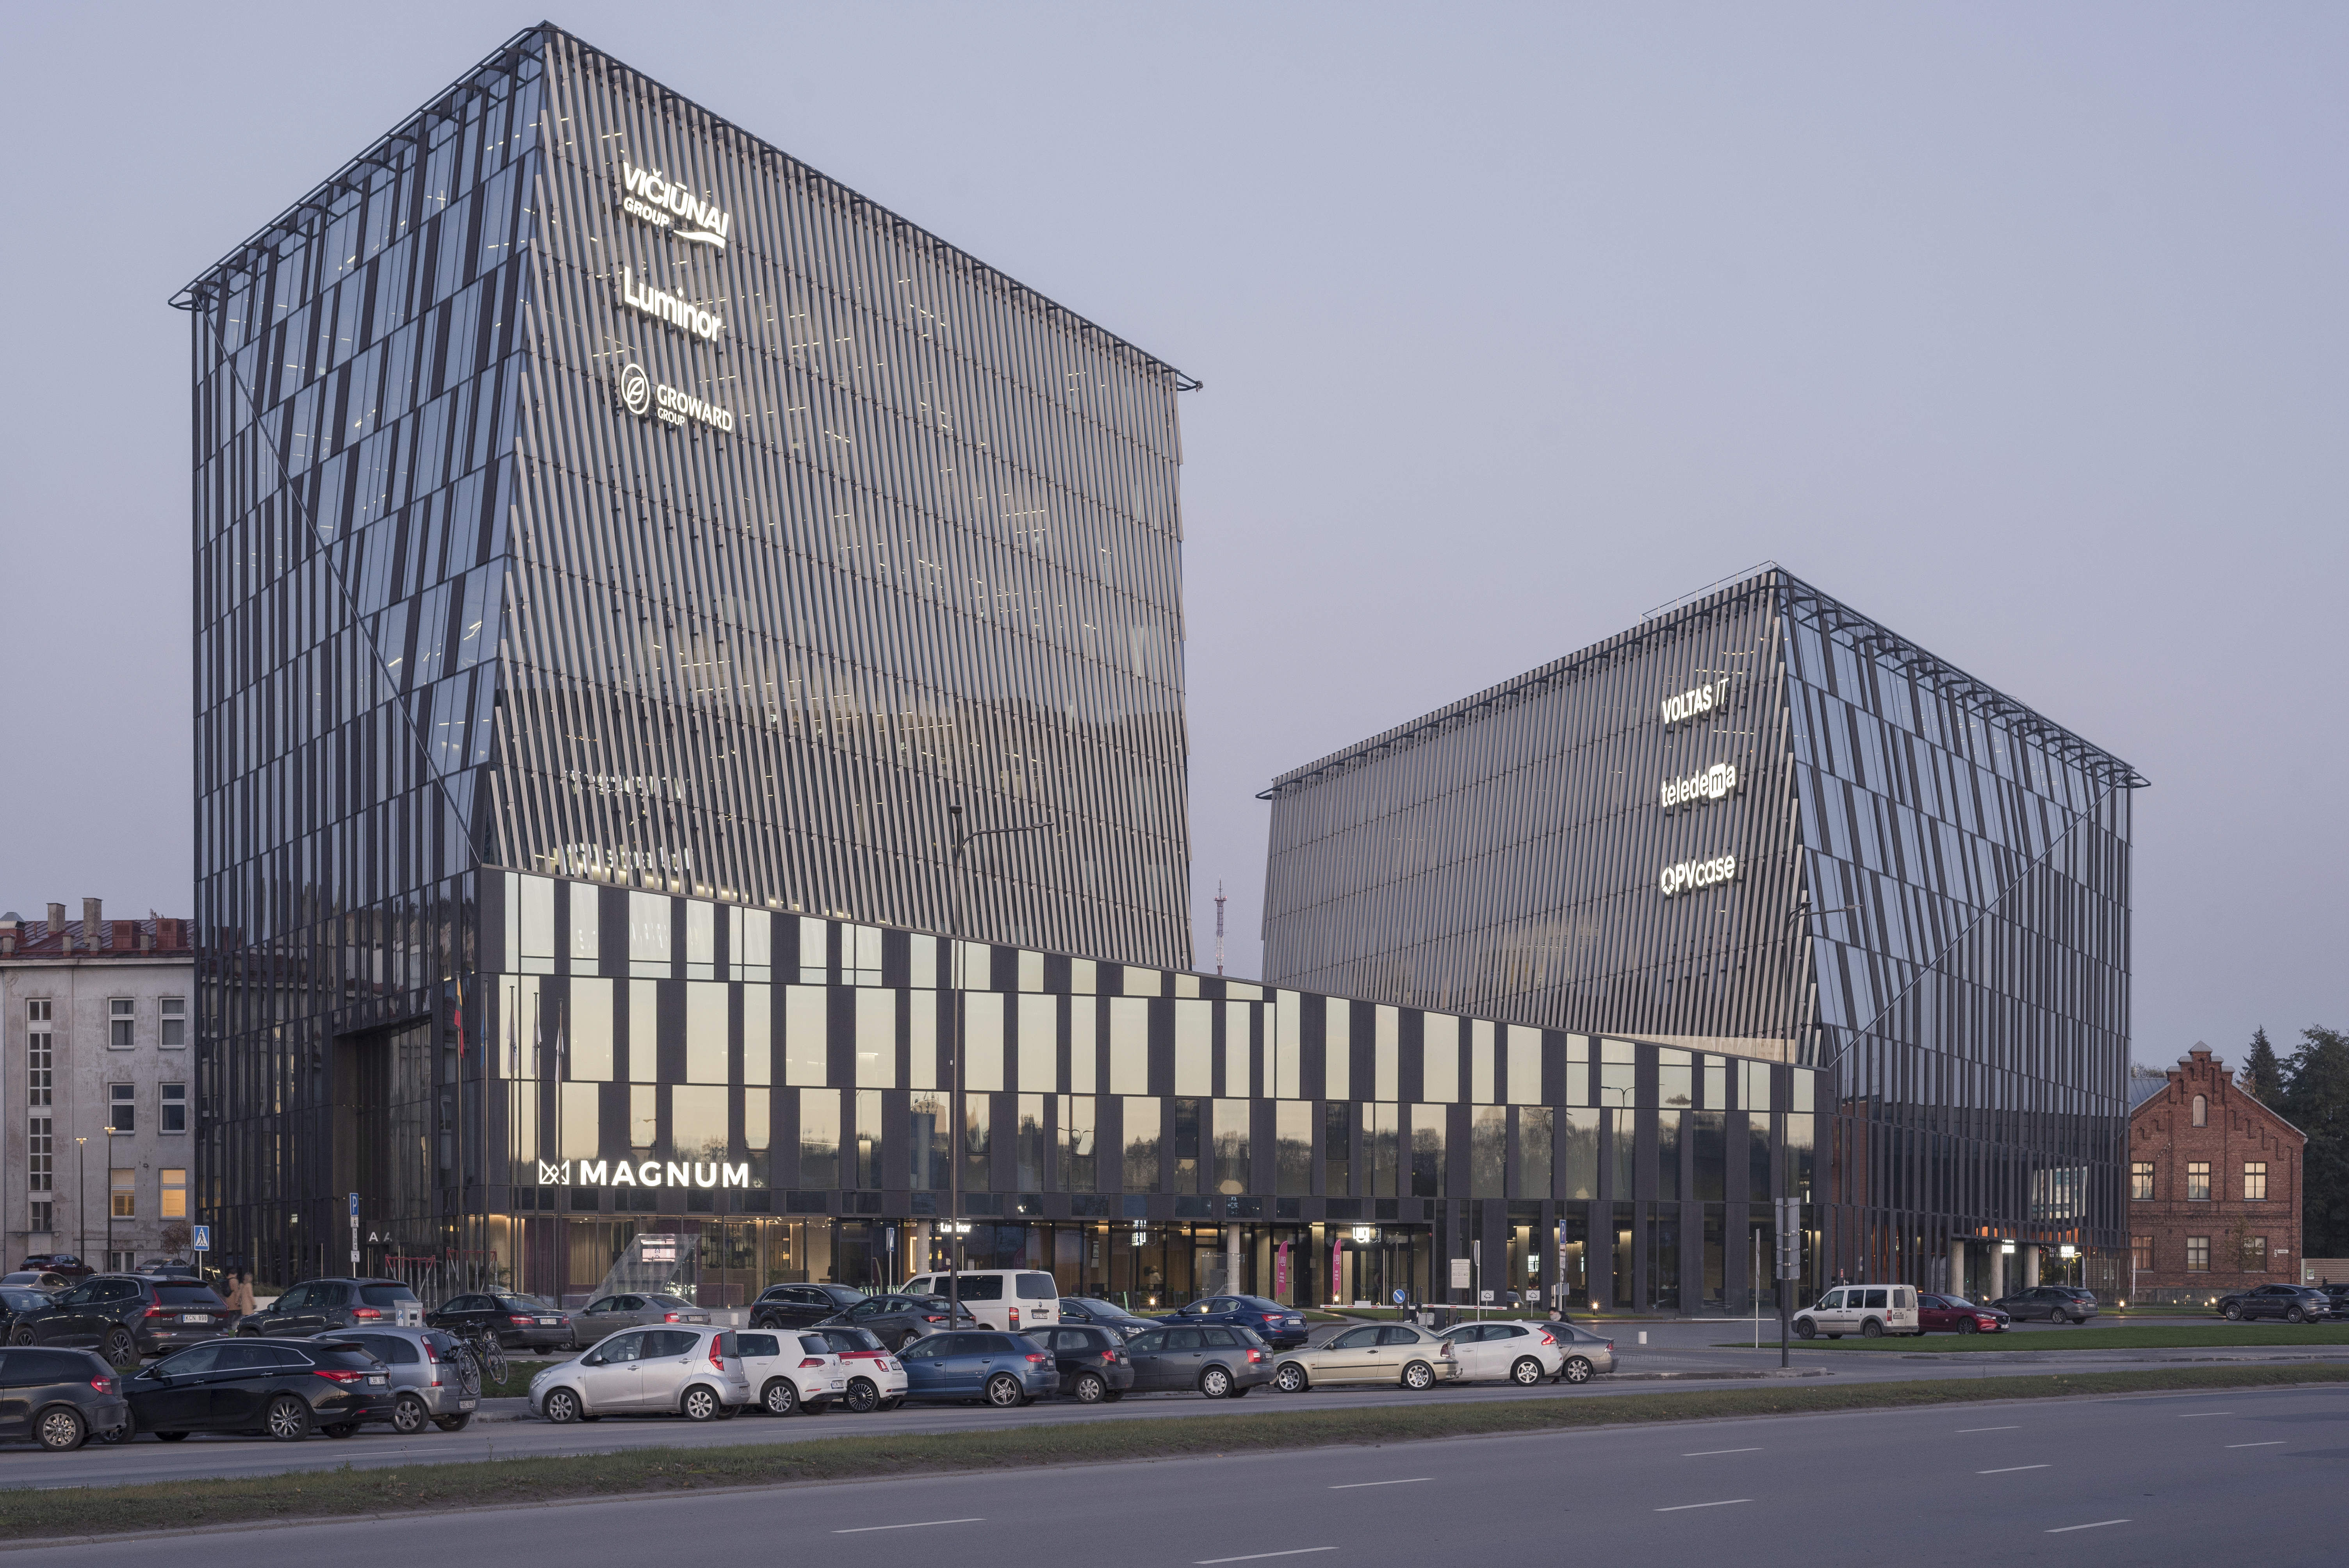 WICONA Developed A Façade System For An Intelligent A+ Energy Business Center